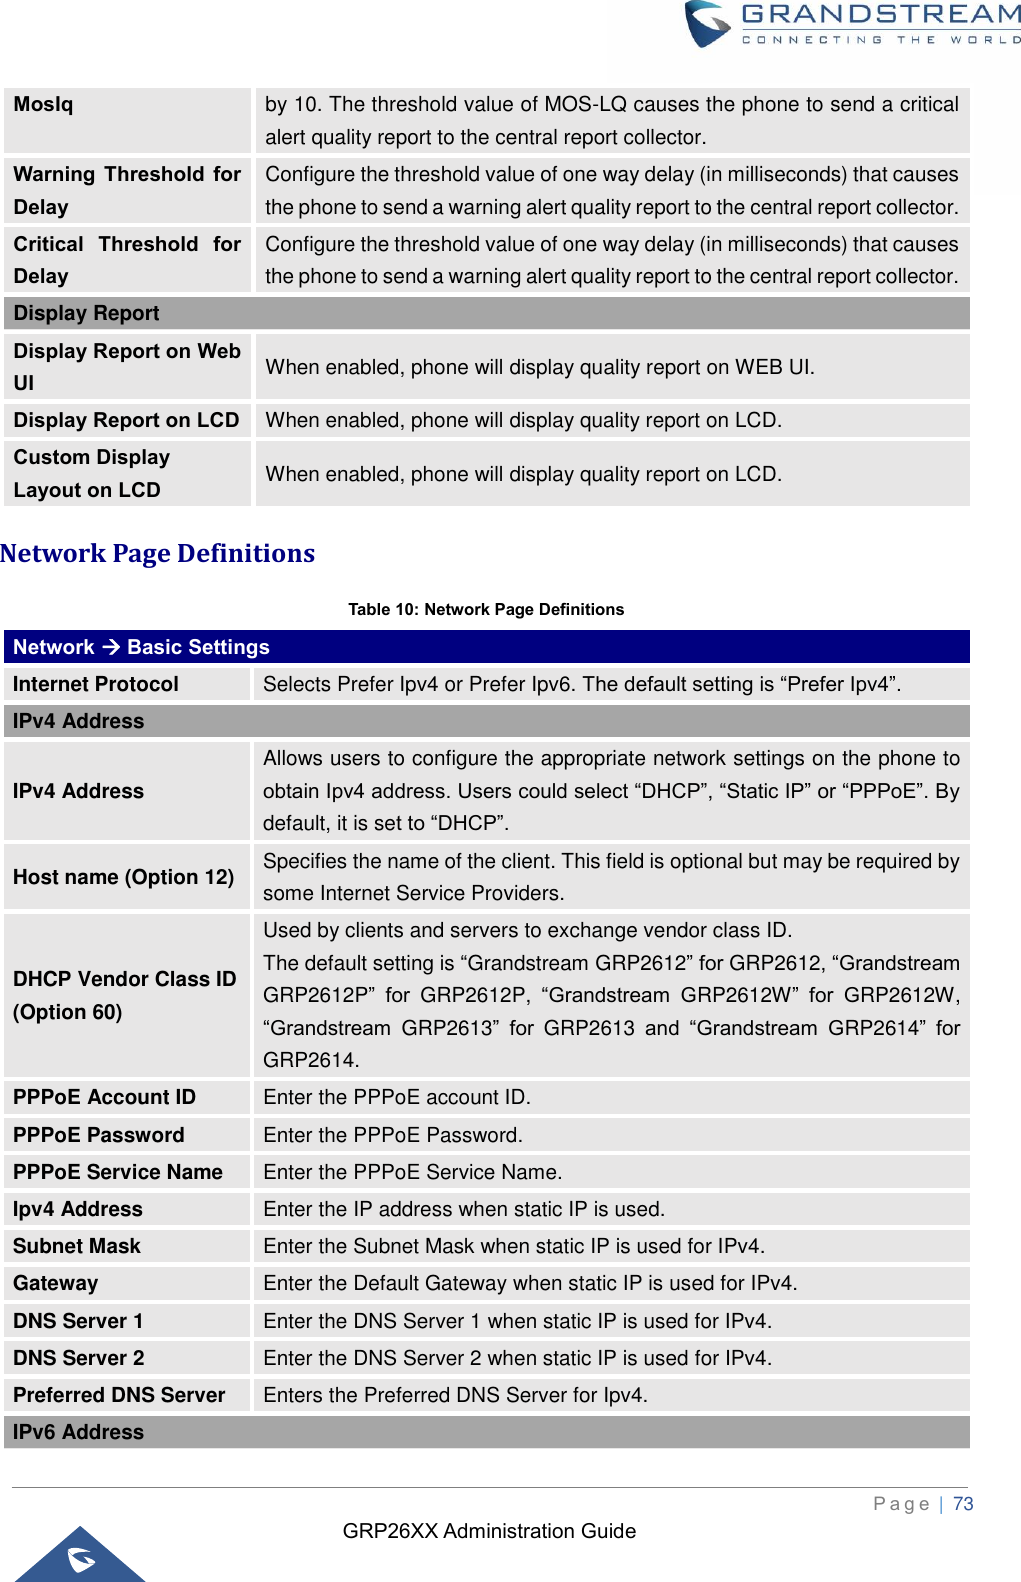 GRP26XX Administration Guide          P a g e  | 73   Network Page Definitions Table 10: Network Page Definitions Network → Basic Settings Internet Protocol Selects Prefer Ipv4 or Prefer Ipv6. The default setting is “Prefer Ipv4”. IPv4 Address IPv4 Address Allows users to configure the appropriate network settings on the phone to obtain Ipv4 address. Users could select “DHCP”, “Static IP” or “PPPoE”. By default, it is set to “DHCP”. Host name (Option 12) Specifies the name of the client. This field is optional but may be required by some Internet Service Providers.   DHCP Vendor Class ID   (Option 60) Used by clients and servers to exchange vendor class ID.   The default setting is “Grandstream GRP2612” for GRP2612, “Grandstream GRP2612P”  for  GRP2612P,  “Grandstream  GRP2612W”  for  GRP2612W, “Grandstream  GRP2613”  for  GRP2613  and  “Grandstream  GRP2614”  for GRP2614. PPPoE Account ID Enter the PPPoE account ID. PPPoE Password Enter the PPPoE Password. PPPoE Service Name Enter the PPPoE Service Name. Ipv4 Address Enter the IP address when static IP is used. Subnet Mask Enter the Subnet Mask when static IP is used for IPv4. Gateway Enter the Default Gateway when static IP is used for IPv4. DNS Server 1 Enter the DNS Server 1 when static IP is used for IPv4. DNS Server 2 Enter the DNS Server 2 when static IP is used for IPv4. Preferred DNS Server Enters the Preferred DNS Server for Ipv4. IPv6 Address MosIq by 10. The threshold value of MOS-LQ causes the phone to send a critical alert quality report to the central report collector. Warning  Threshold  for Delay Configure the threshold value of one way delay (in milliseconds) that causes the phone to send a warning alert quality report to the central report collector. Critical  Threshold  for Delay Configure the threshold value of one way delay (in milliseconds) that causes the phone to send a warning alert quality report to the central report collector. Display Report Display Report on Web UI When enabled, phone will display quality report on WEB UI. Display Report on LCD When enabled, phone will display quality report on LCD. Custom Display Layout on LCD When enabled, phone will display quality report on LCD. 